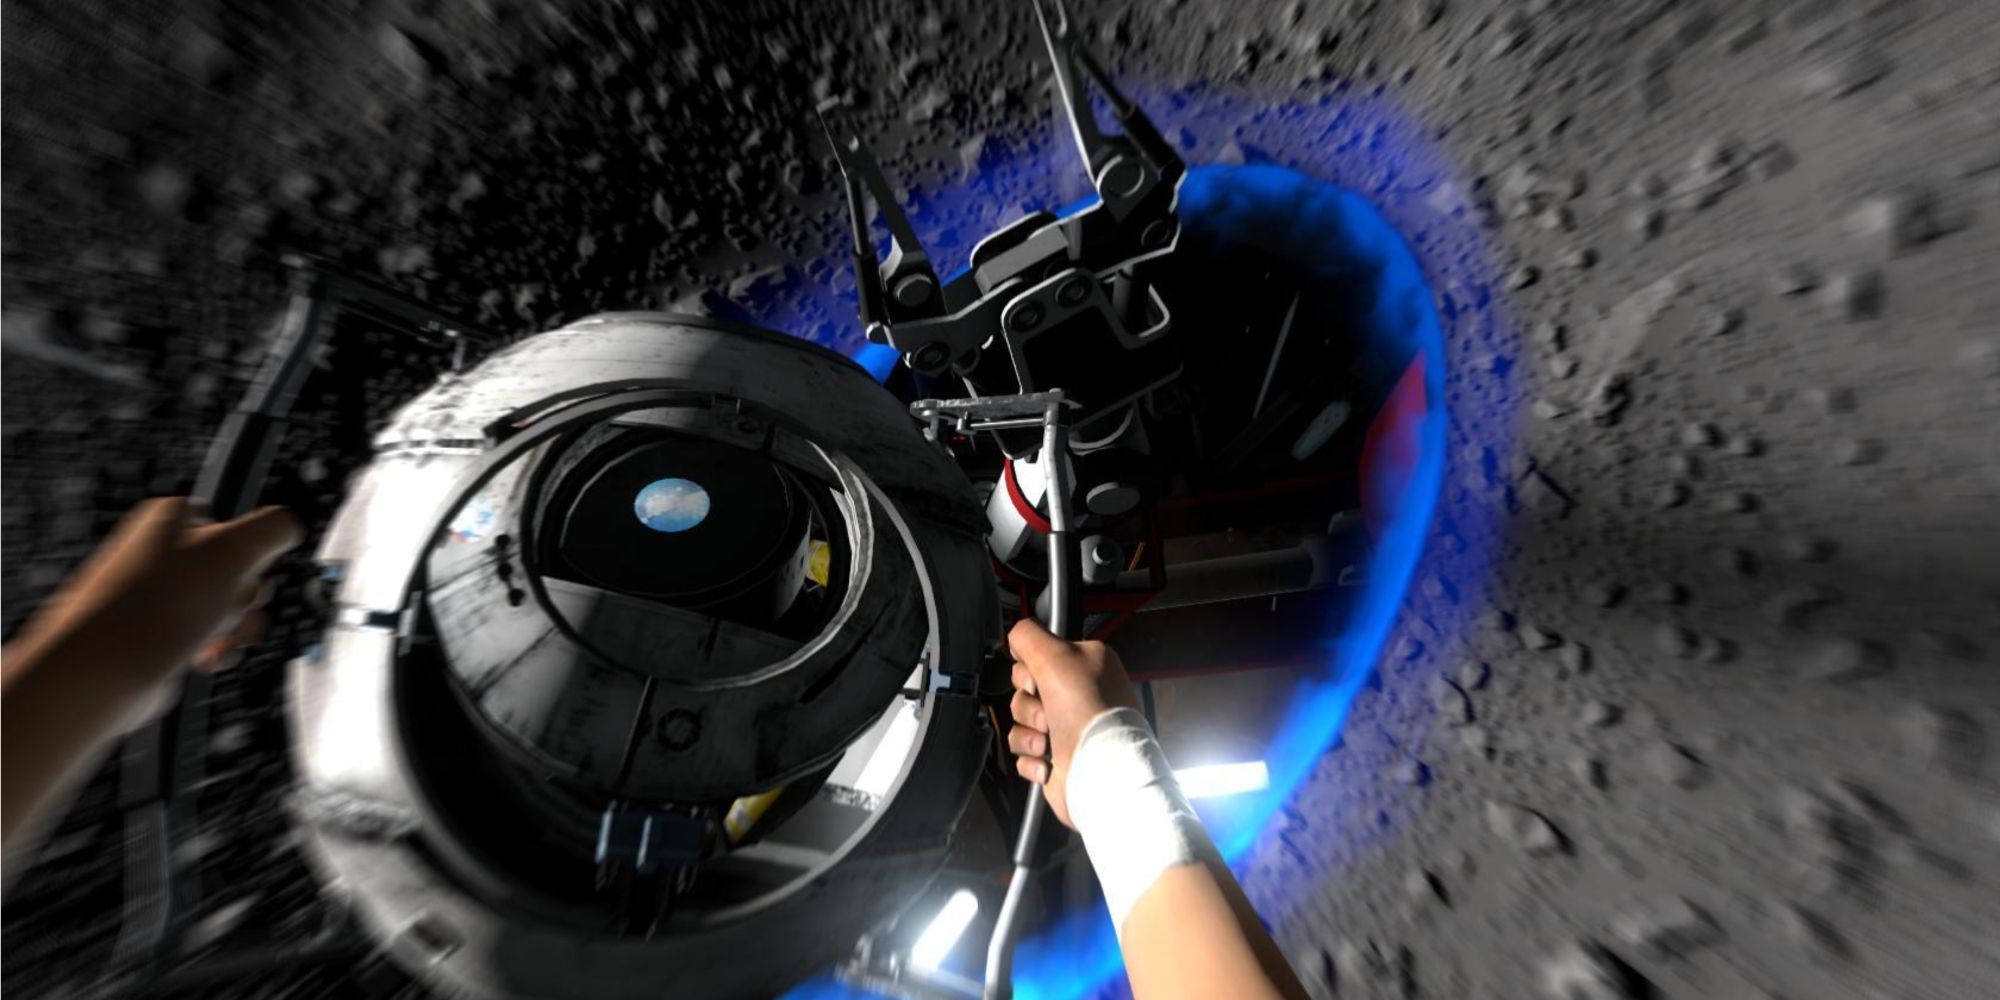 Chell holding Wheatley as they travel through a portal on the moon in Portal 2